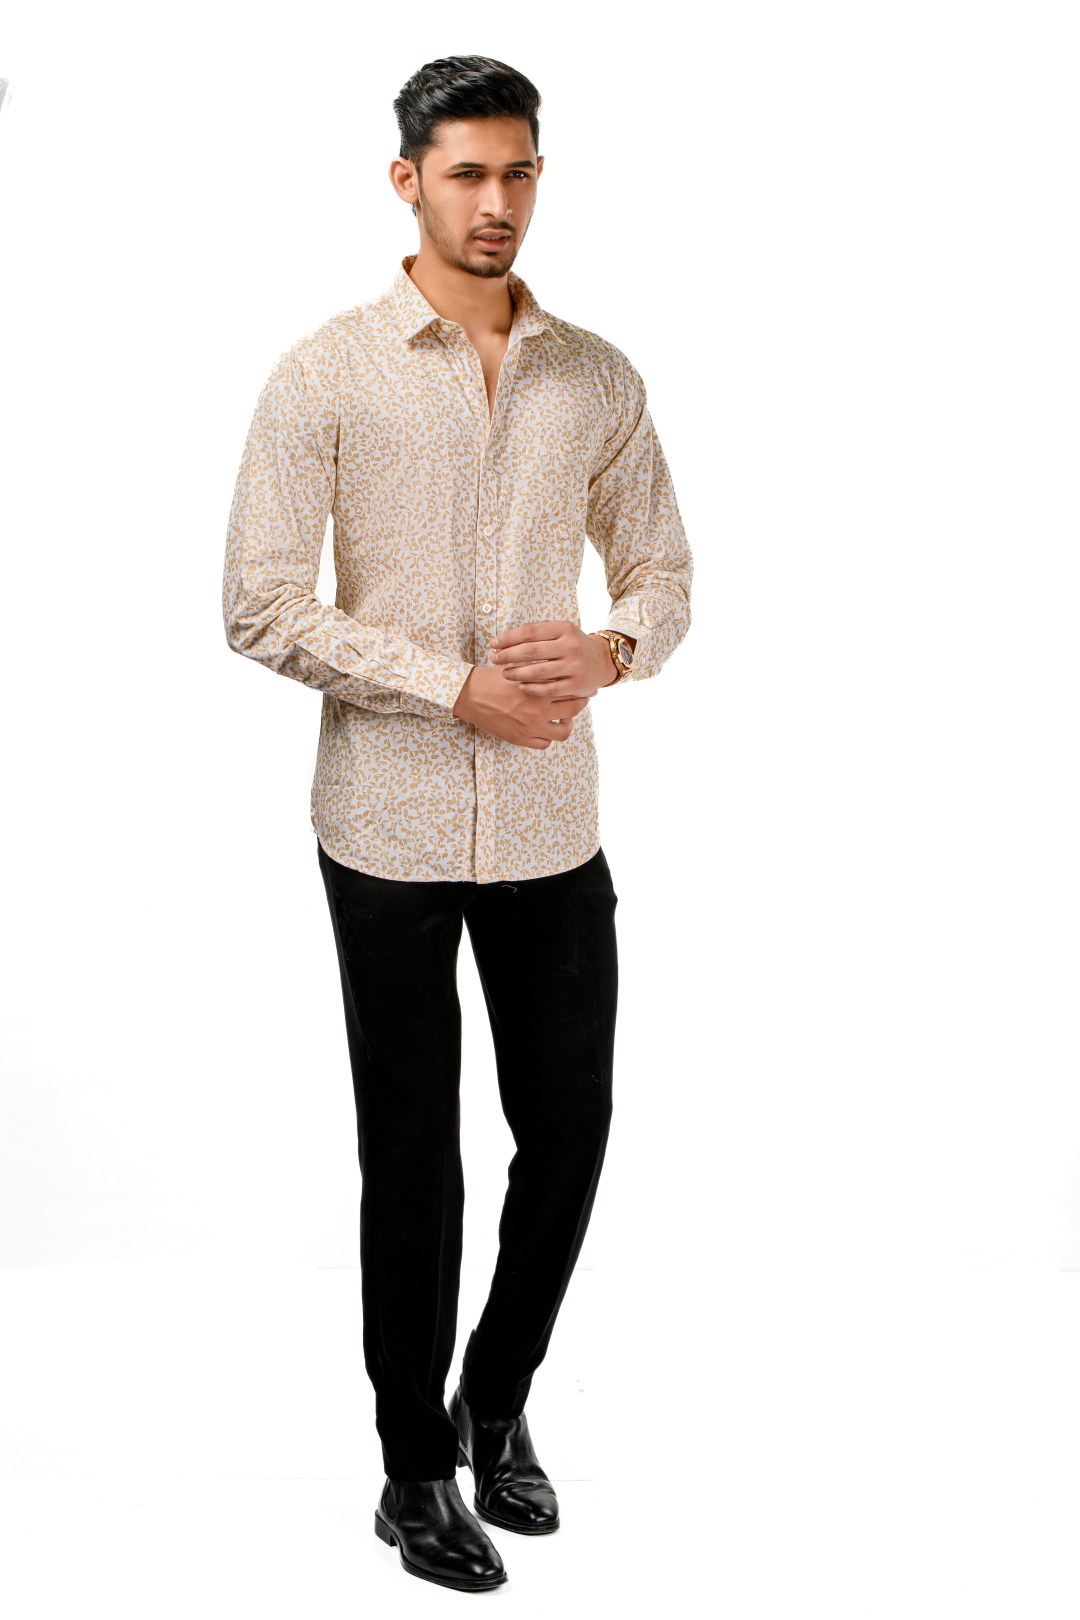 Tissufin White With Light Yellow Floral Printed Pure Cotton Shirt